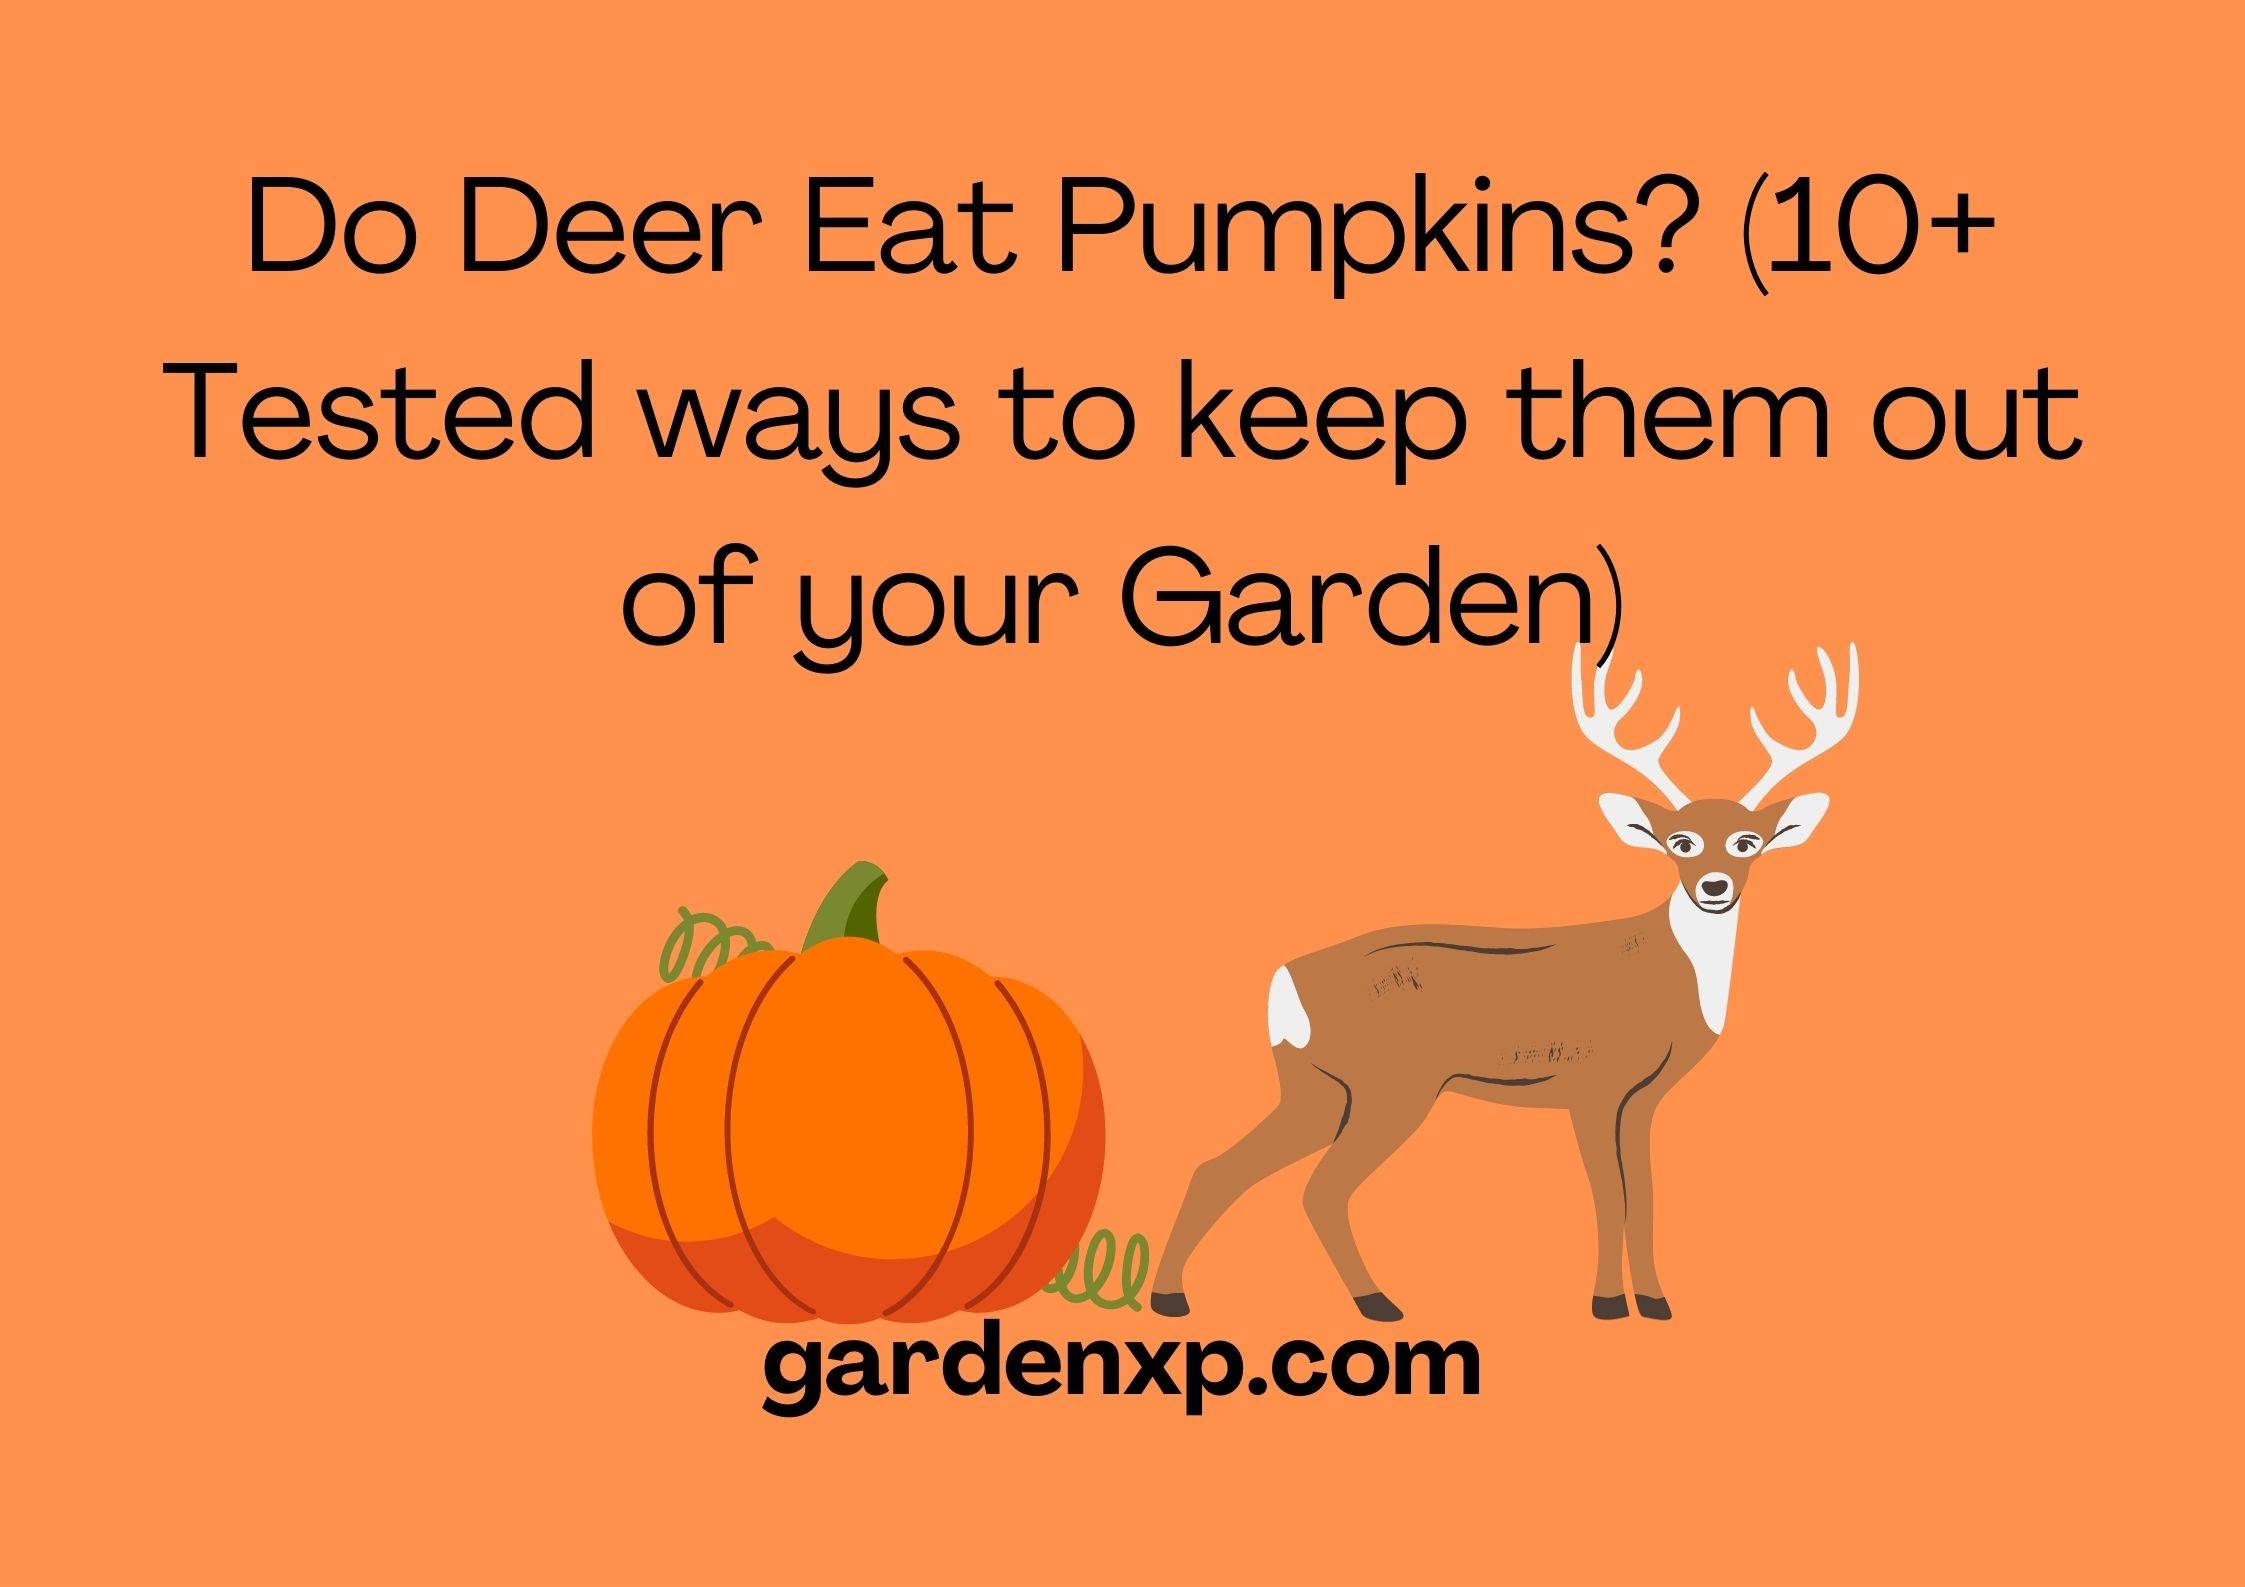 Do Deer Eat Pumpkins? (10+ Tested ways to keep them out of your Garden)